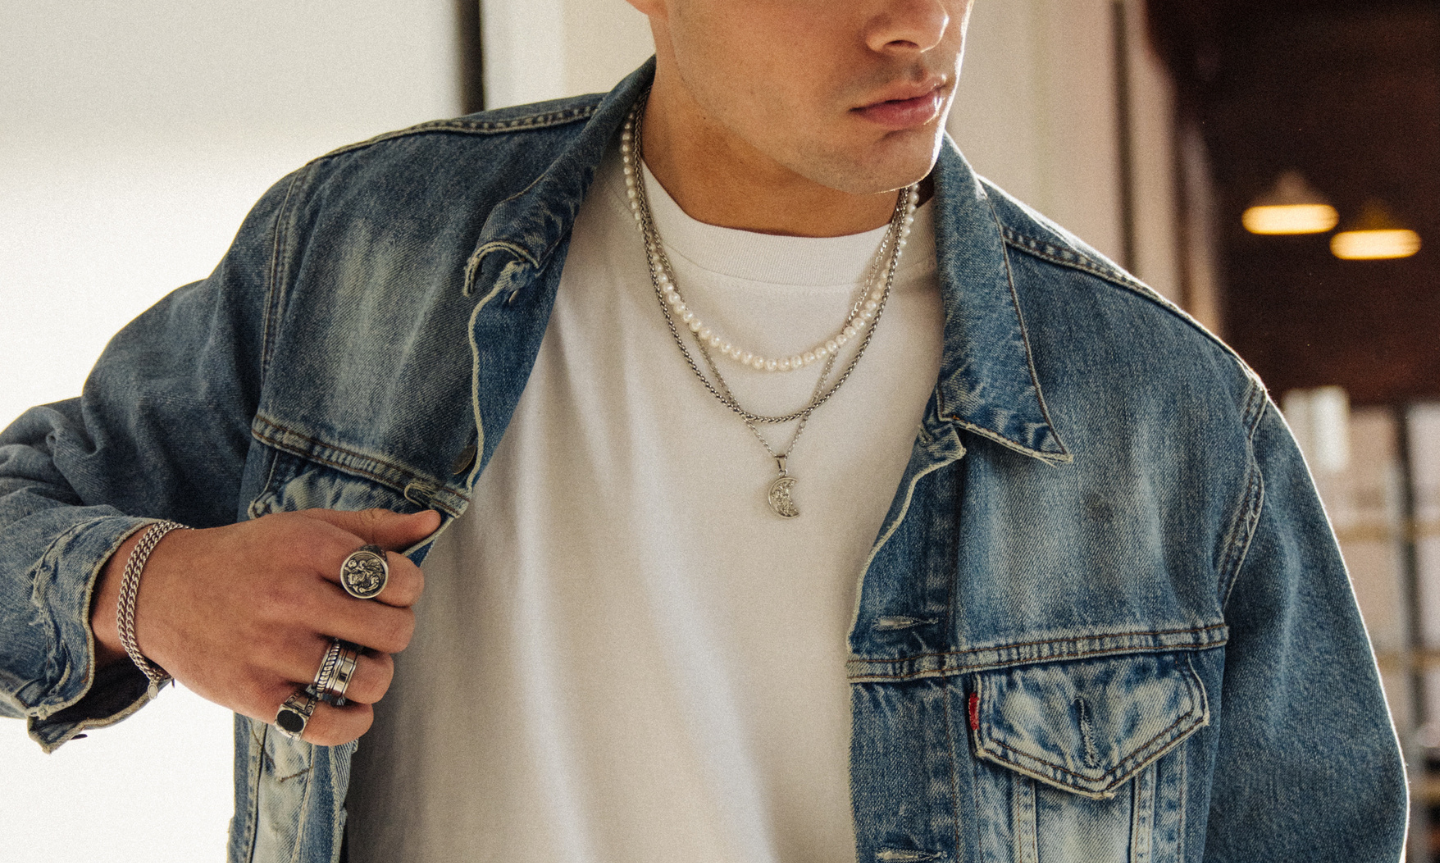 Men's Jewelry as a path to personal growth